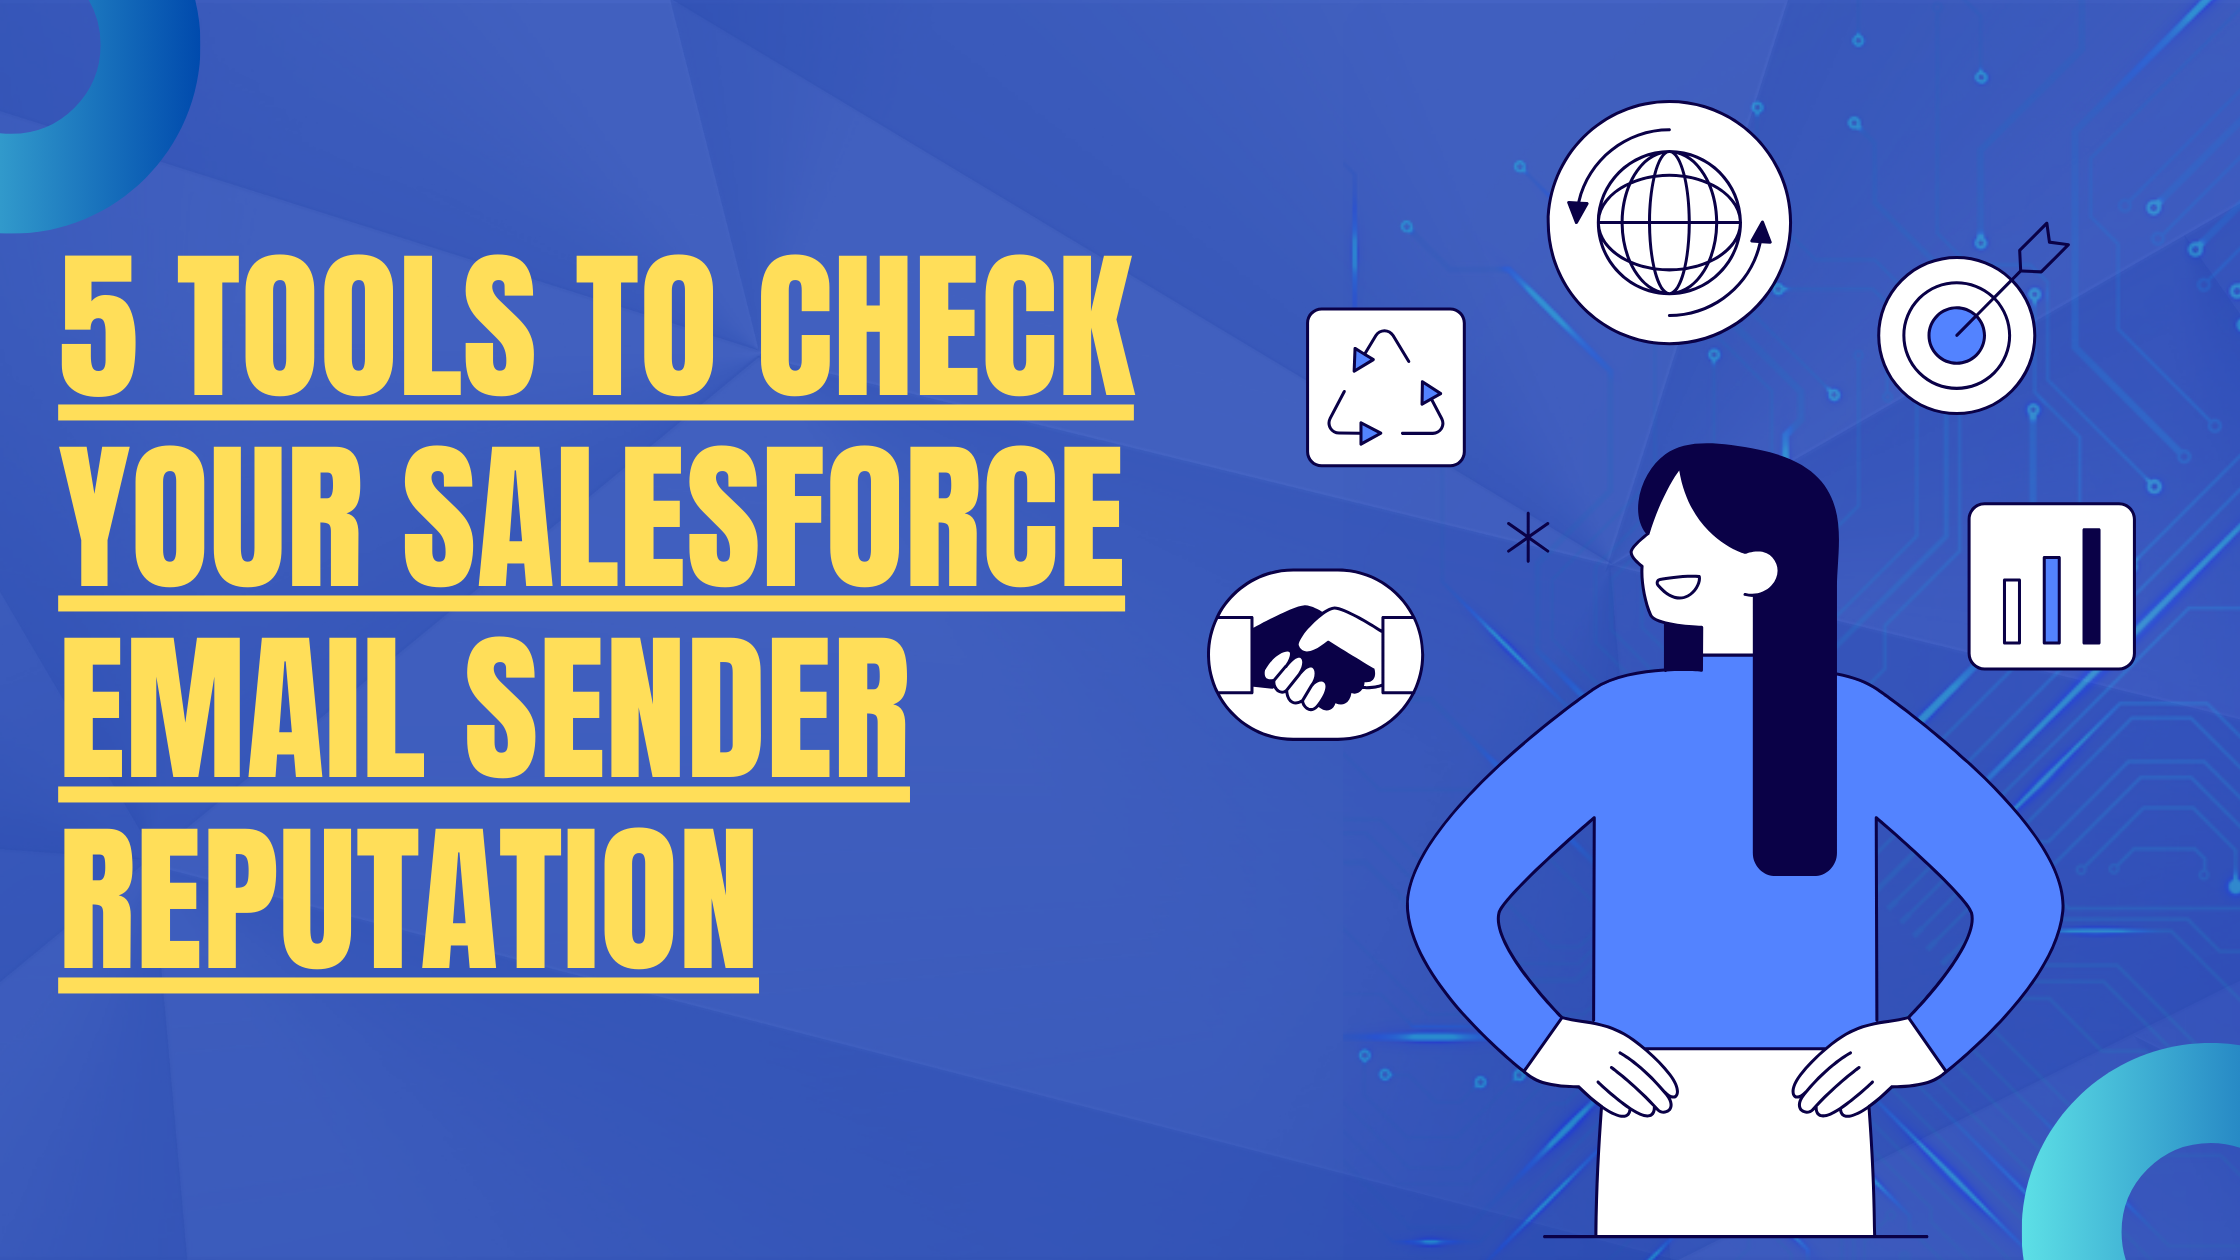 5 Tools to Check Your Salesforce Email Sender Reputation